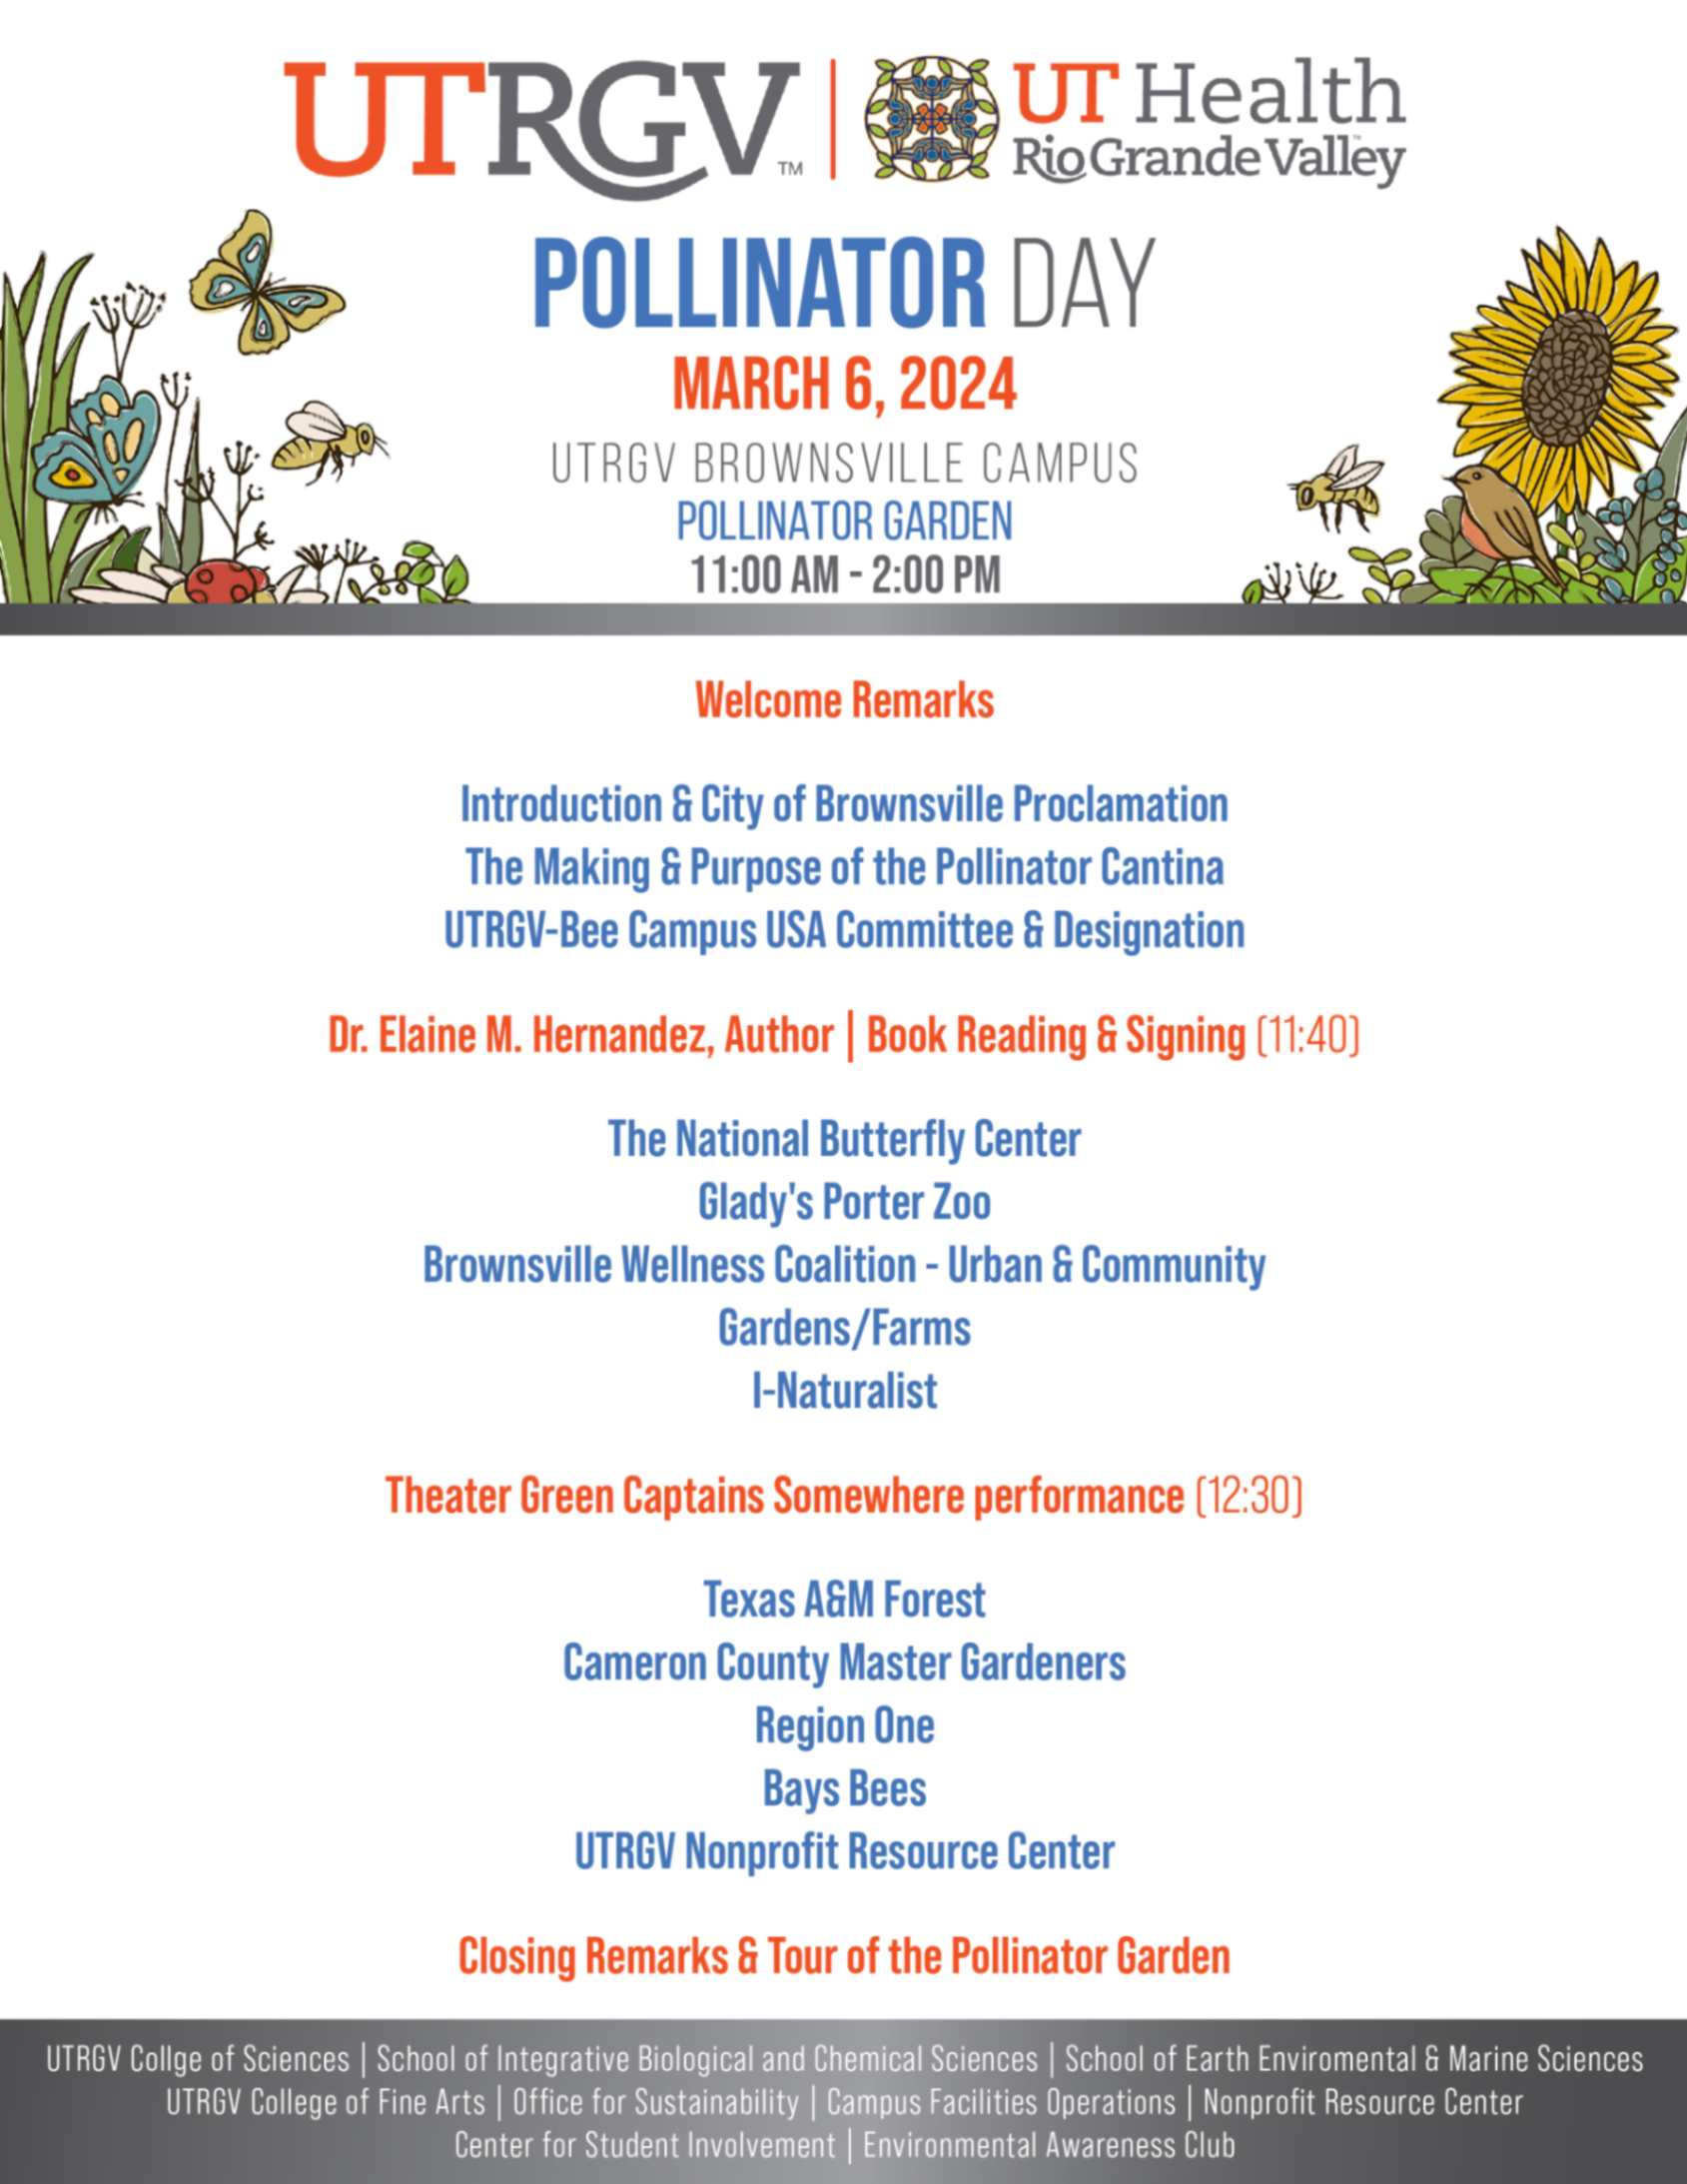 Pollinator Day March 6, 2024 UTRGV Brownsville Campus Pollinator Garden 11:00 am - 2:00pm. Welcome Remarks: Introduction and City of Brownsville Proclamation, The Making and Purpose of the Pollinator Cantina, UTRGV-Bee Campus USA Committee and Designation. Dr. Elaine M. Hernandez, Author Book Reading and Signing (11:40): The National Burtterfly Center, Glady's Porter Zoo, Brownsville Wellness Coalition - Urban and Community, Gardens/Farms, I-Naturalist. Theater Green Captains Somewhere performance (12:30) Texas A and M Forest, Cameron County Master Gardeners, Region One, Bays Bees, UTRGV Nonprofit Resource Center. Closing Remarks and Tour of the Pollinator Garden.